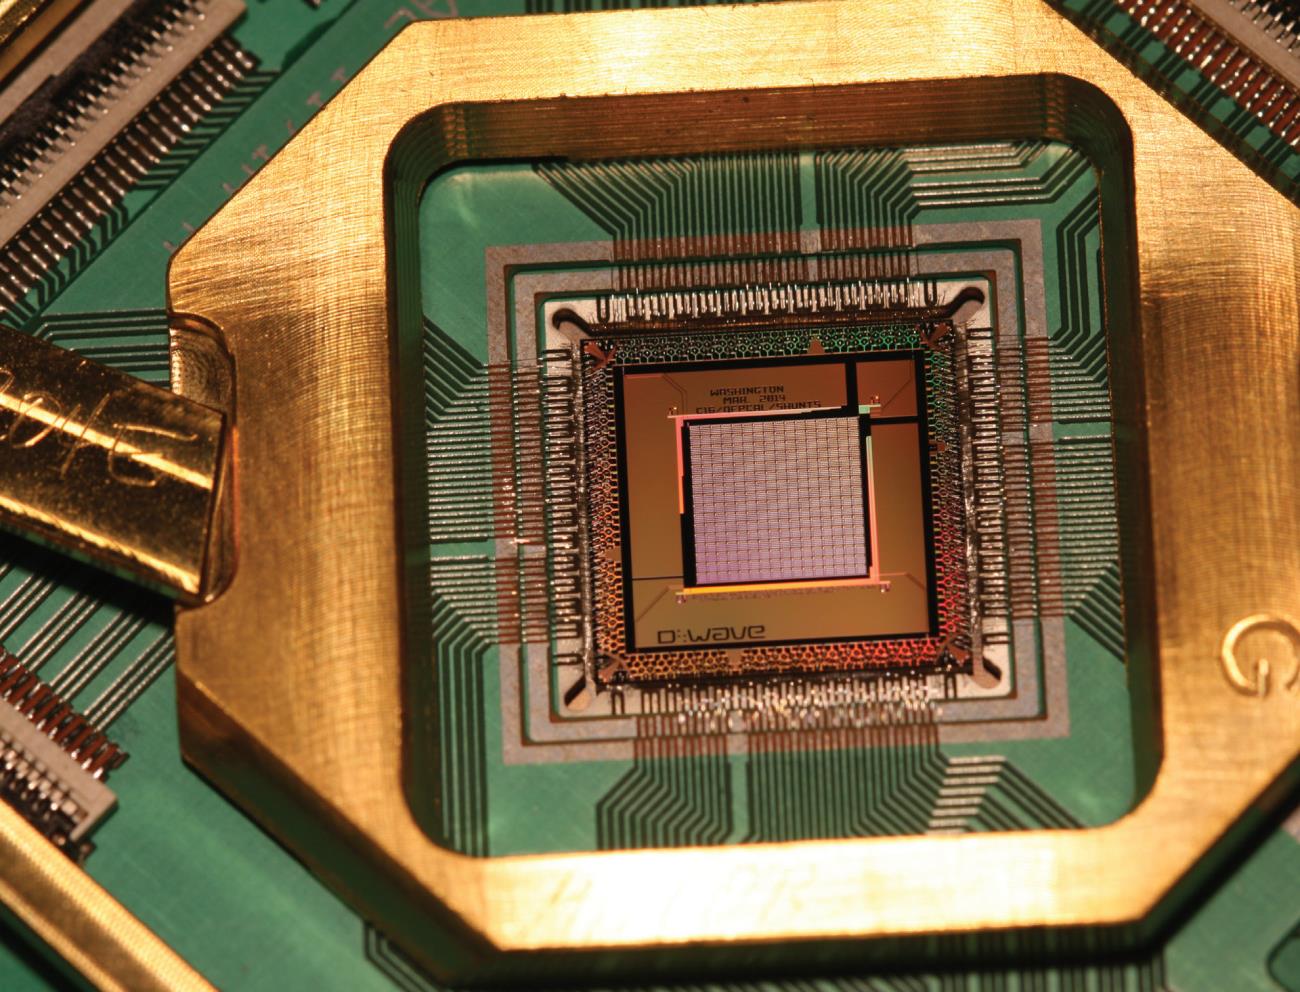 The Quantum Processor is built from a lattice of tiny loops of the metal niobium, each of which is one quantum bit, or qubit. When niobium is cooled down below 9.